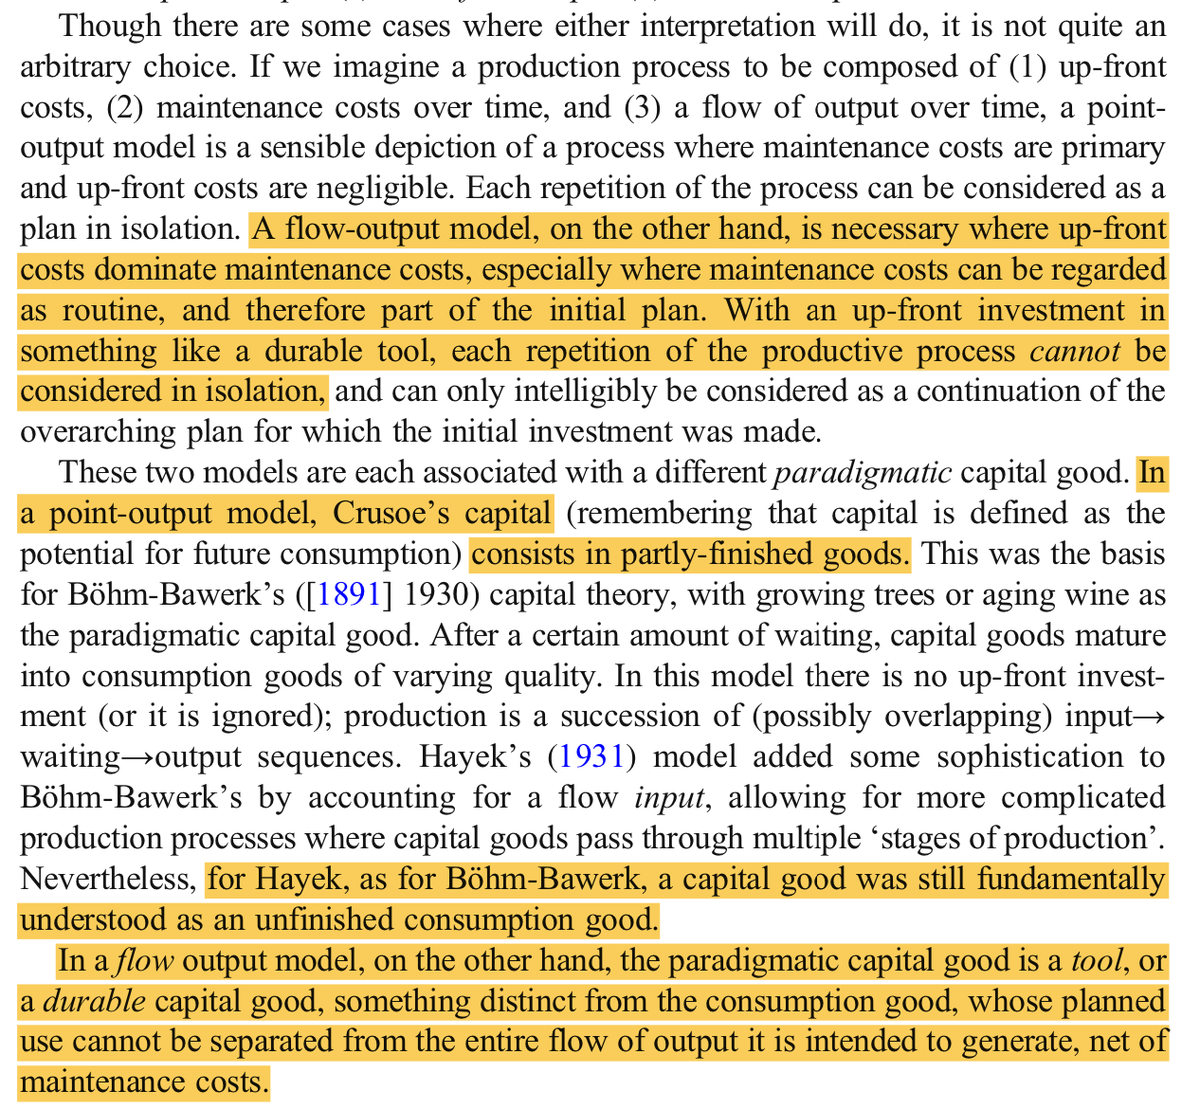 If you imagine production plans as being for *particular items*, you're stuck with a view where capital=goods-in-progress and labor is the only input.To make sense of tools (durable capital) as inputs, you have to imagine people planning to produce *flows* of output.